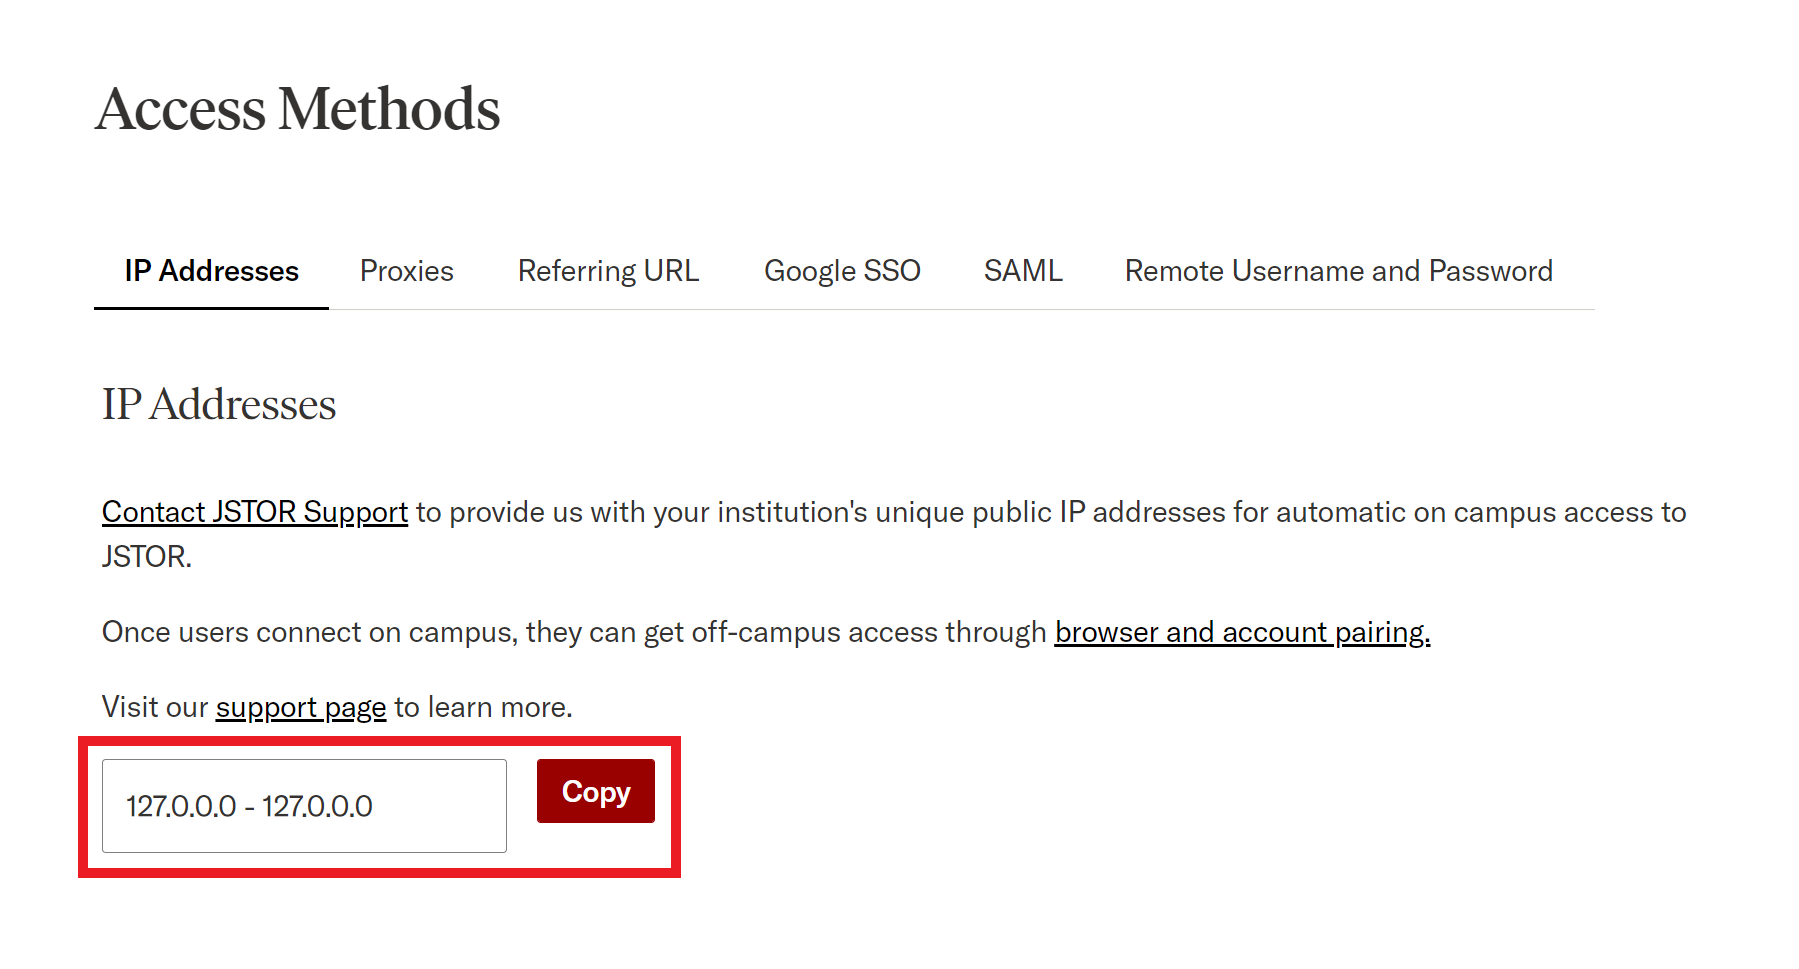 Copy IP addresses button on the Access Methods page in JSTOR Admin